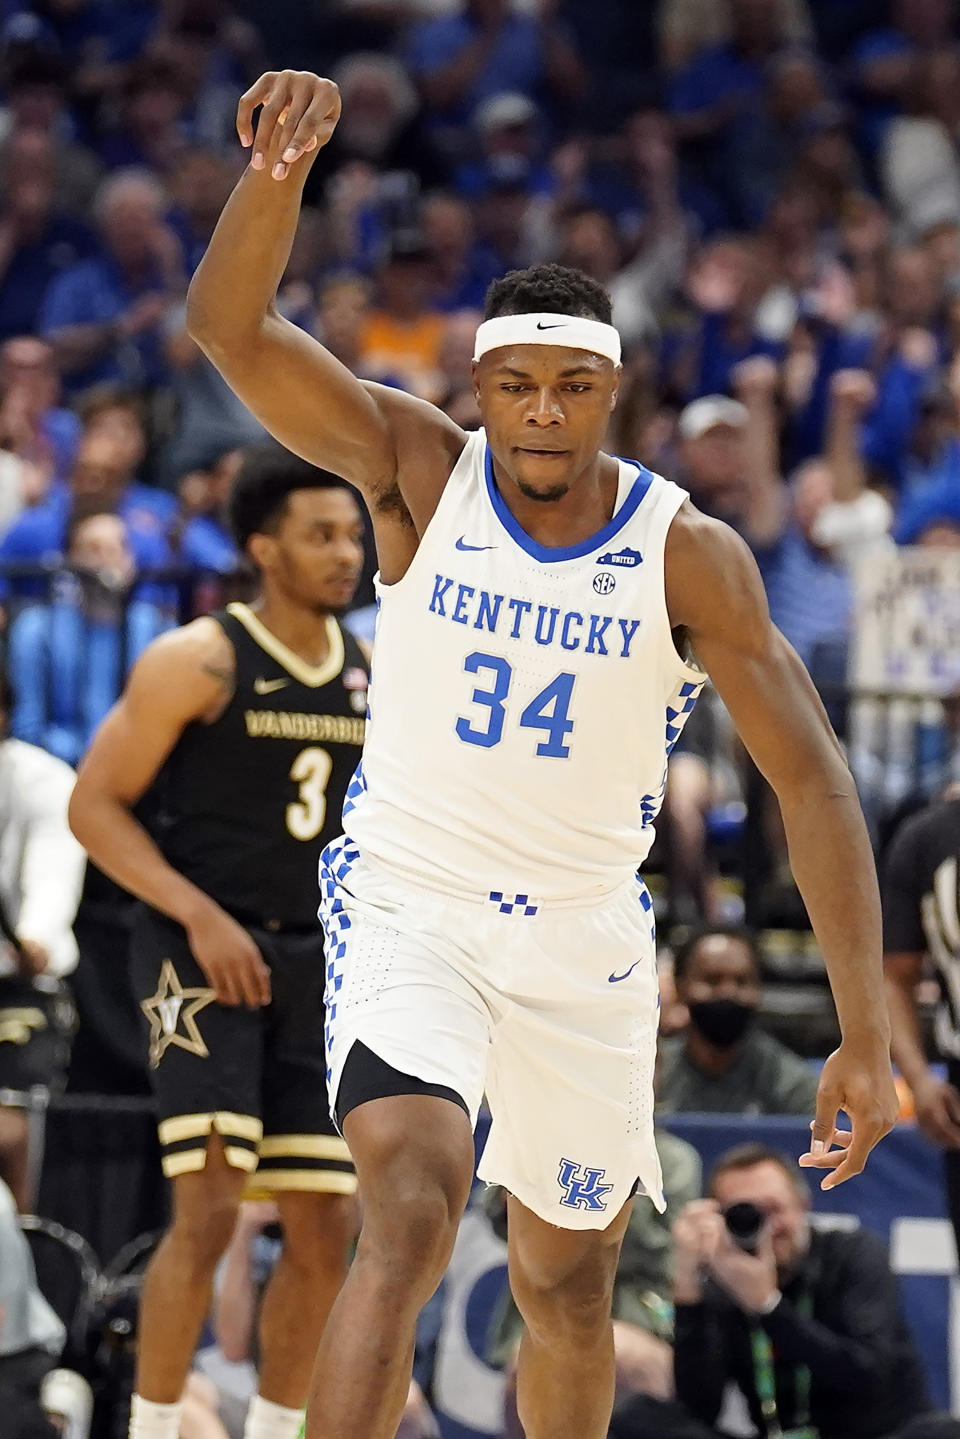 Kentucky forward Oscar Tshiebwe (34) celebrates after making a shot against Vanderbilt during the first half of an NCAA college basketball game in the Southeastern Conference men's tournament Friday, March 11, 2022, in Tampa, Fla. (AP Photo/Chris O'Meara)